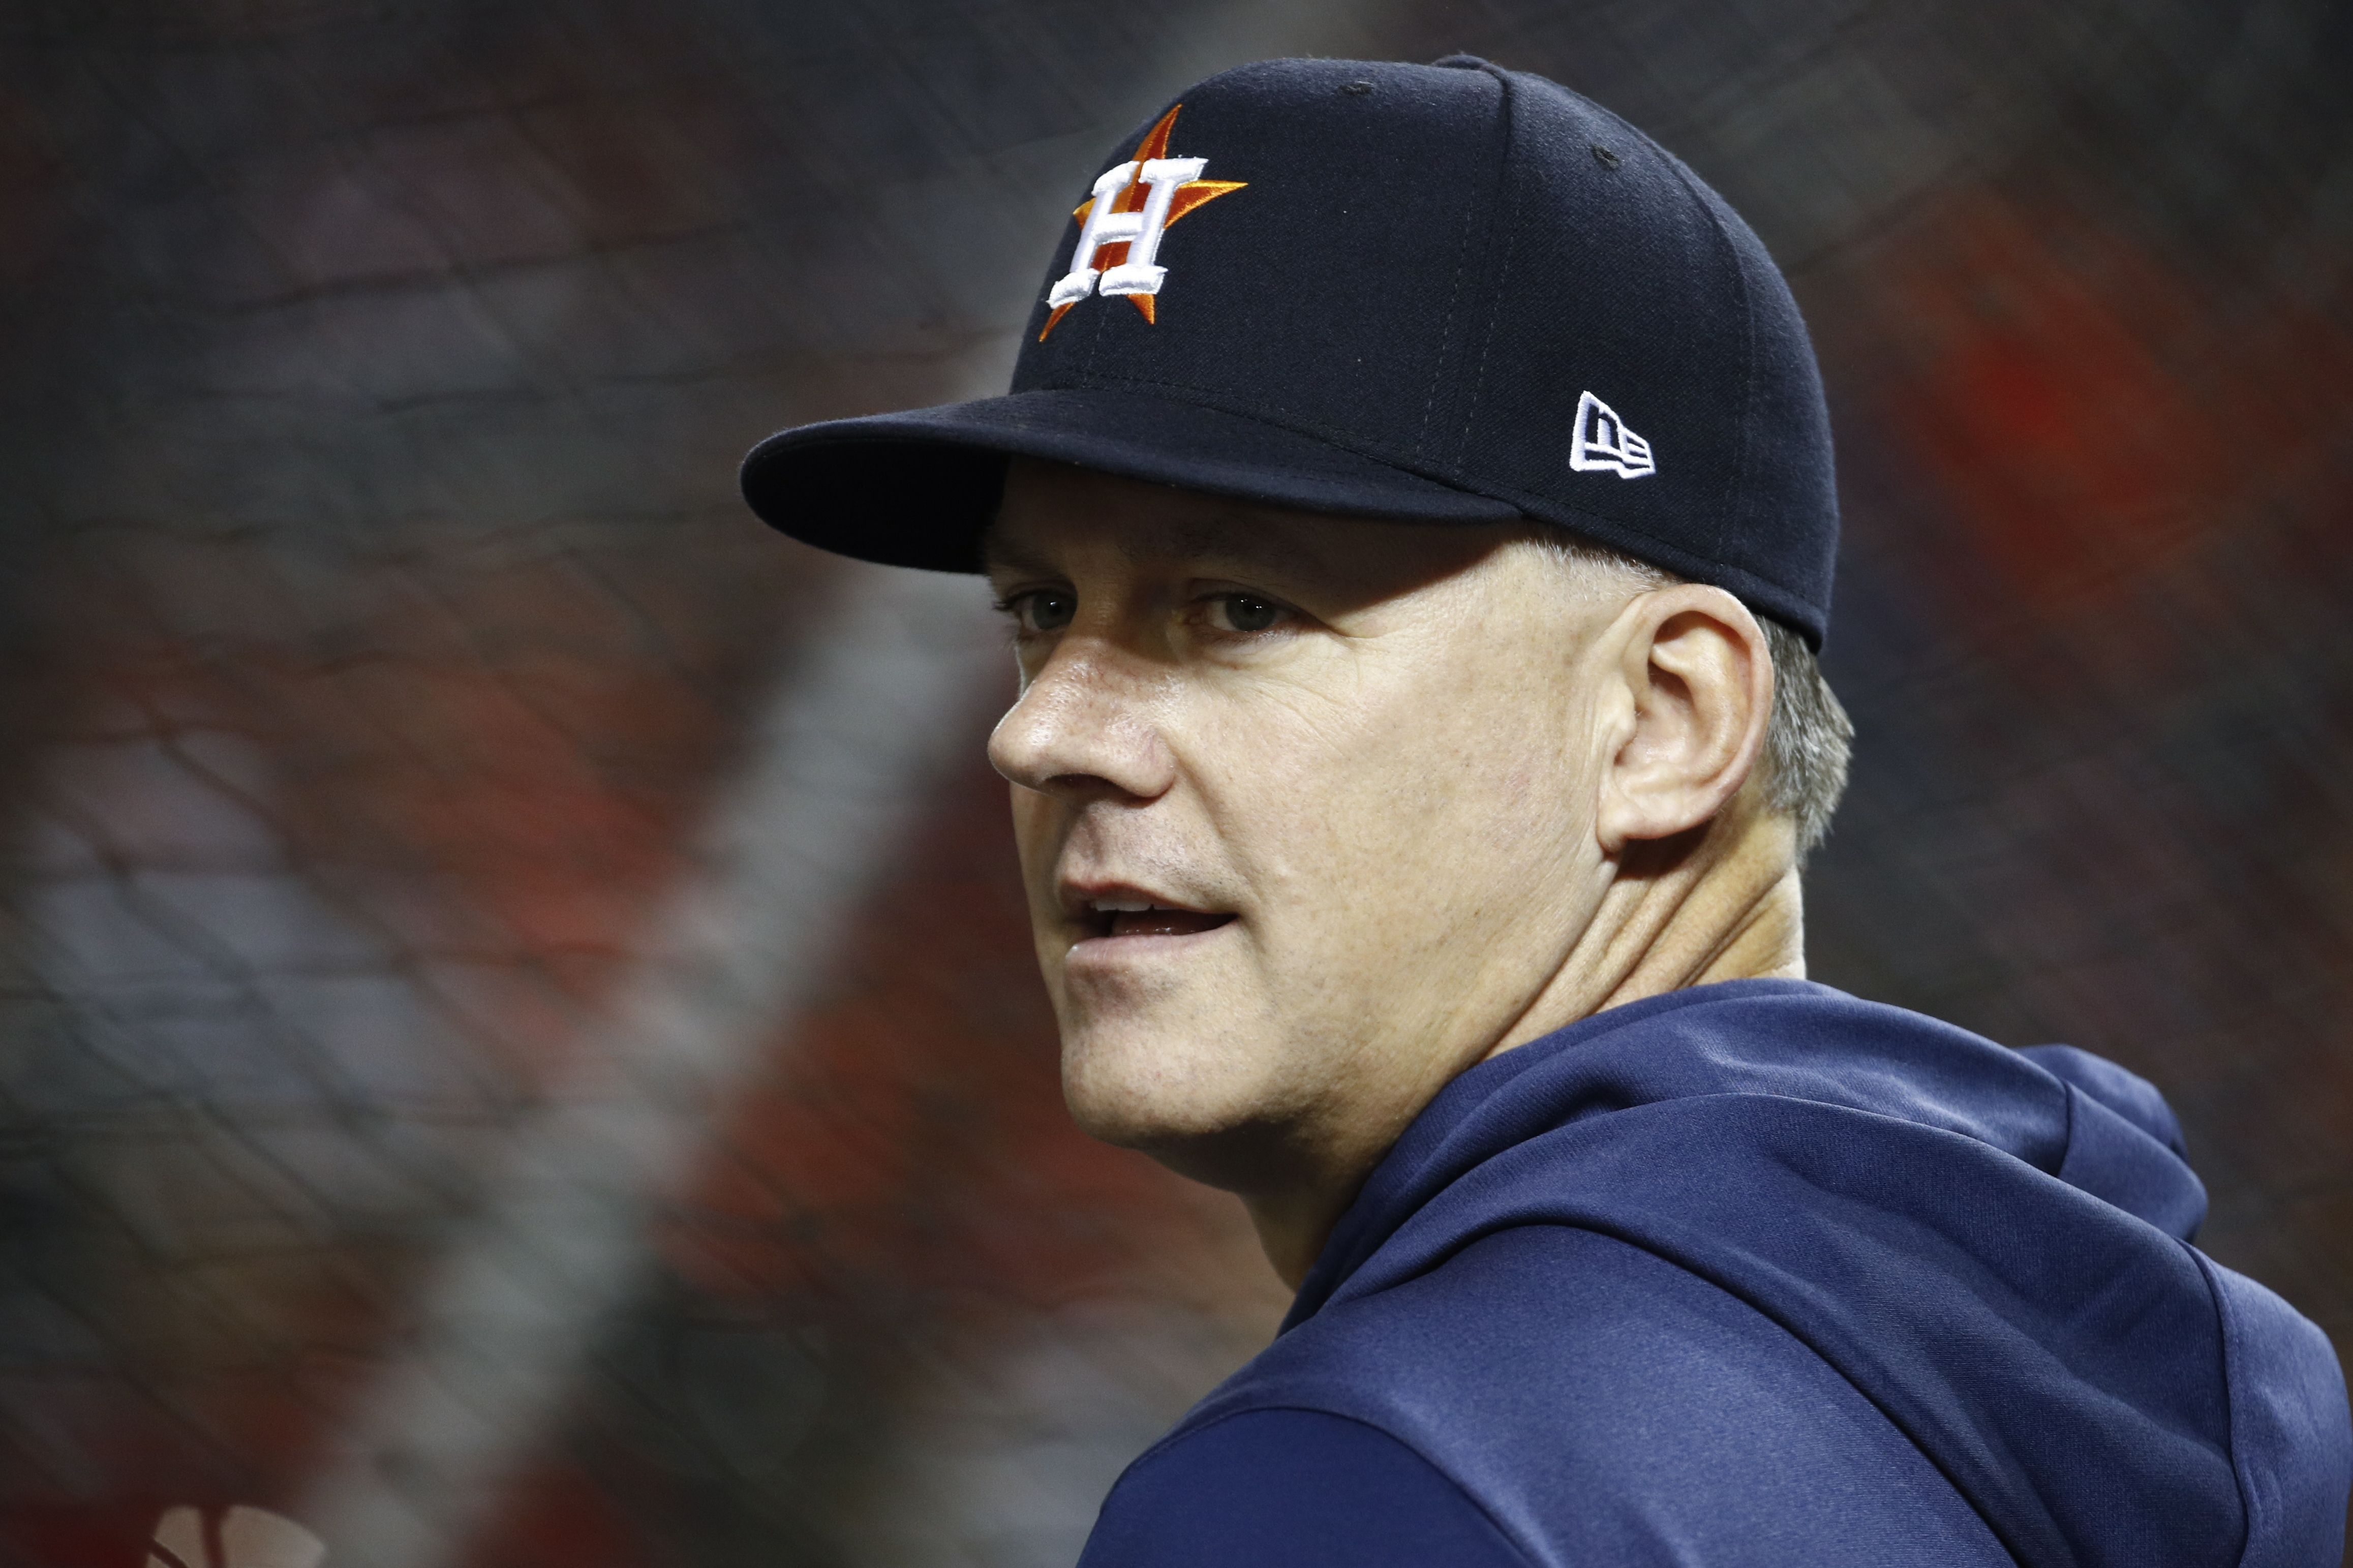 Detroit Tigers manager A.J. Hinch 'super happy' to be in Houston